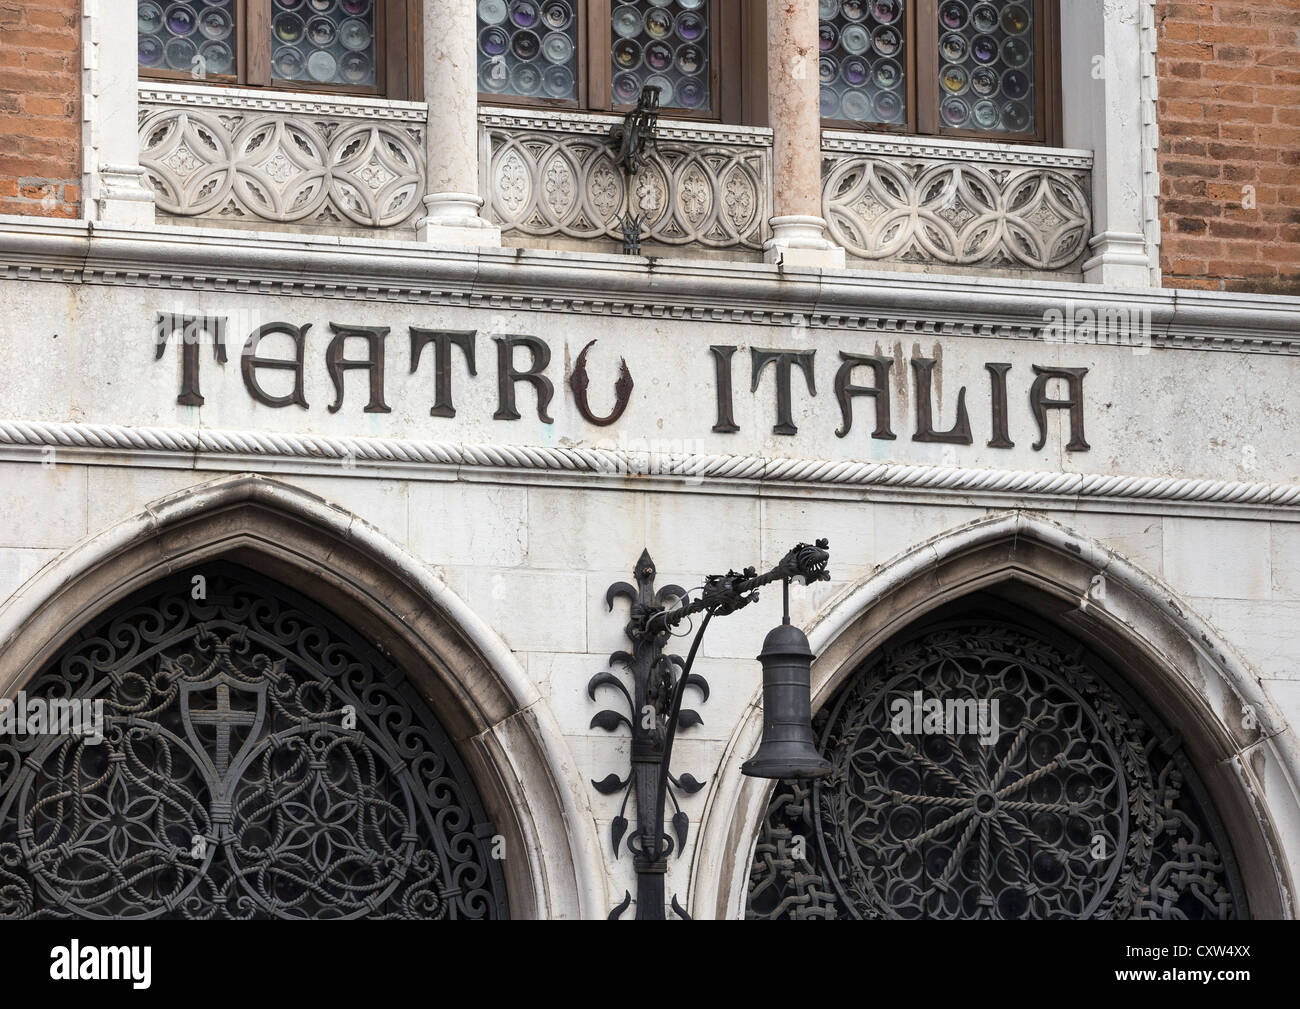 Detail of the facade of the Teatro Italia, showing lettering in wrought iron and typical Venetian Gothic architecture. Stock Photo